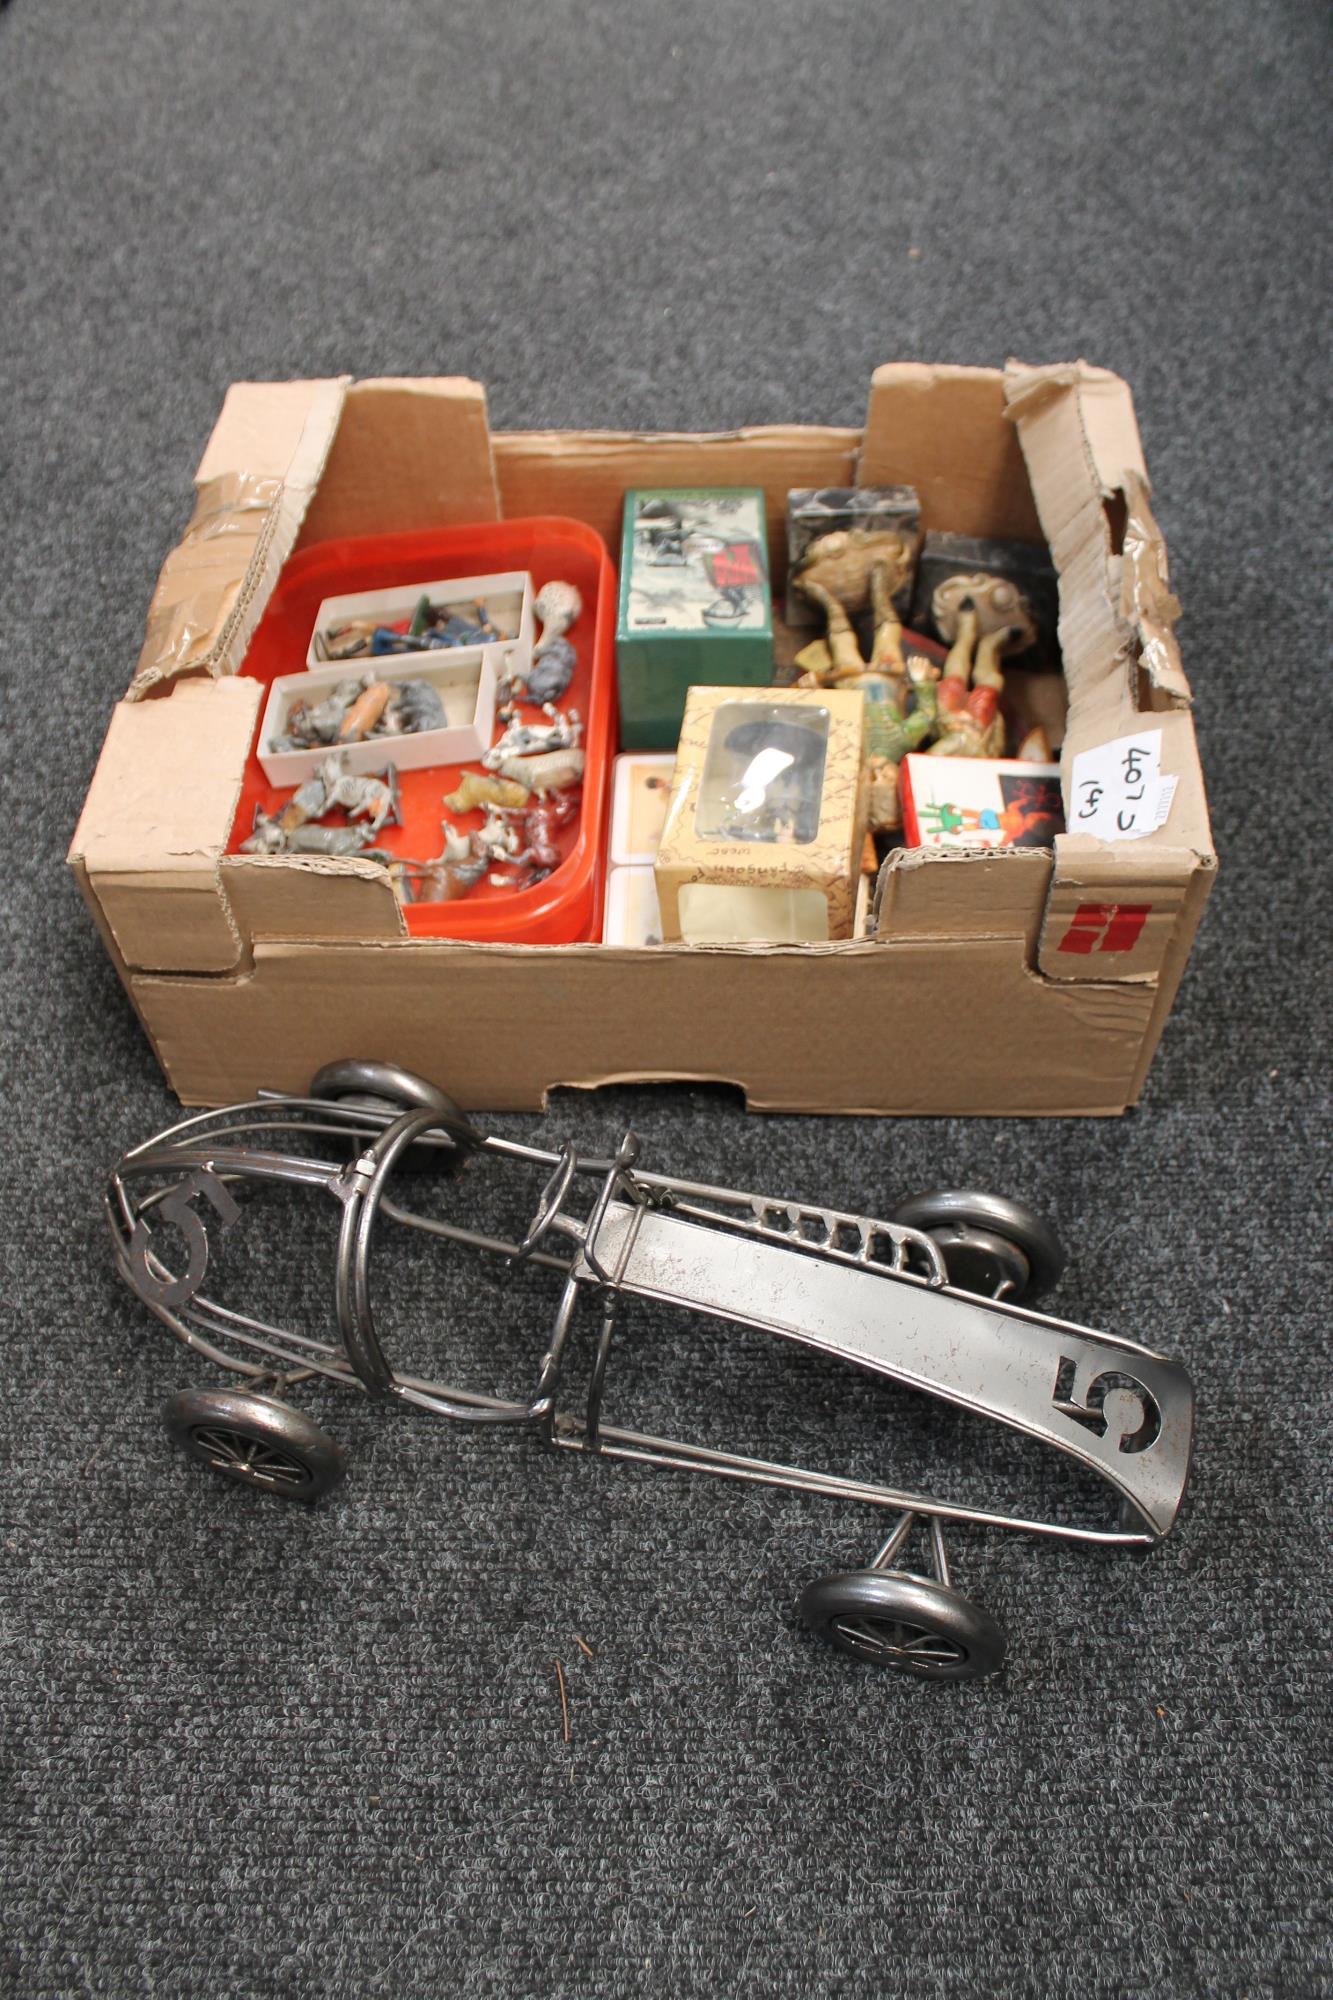 A box of wire metal model of a vintage racing car, boxed card games,